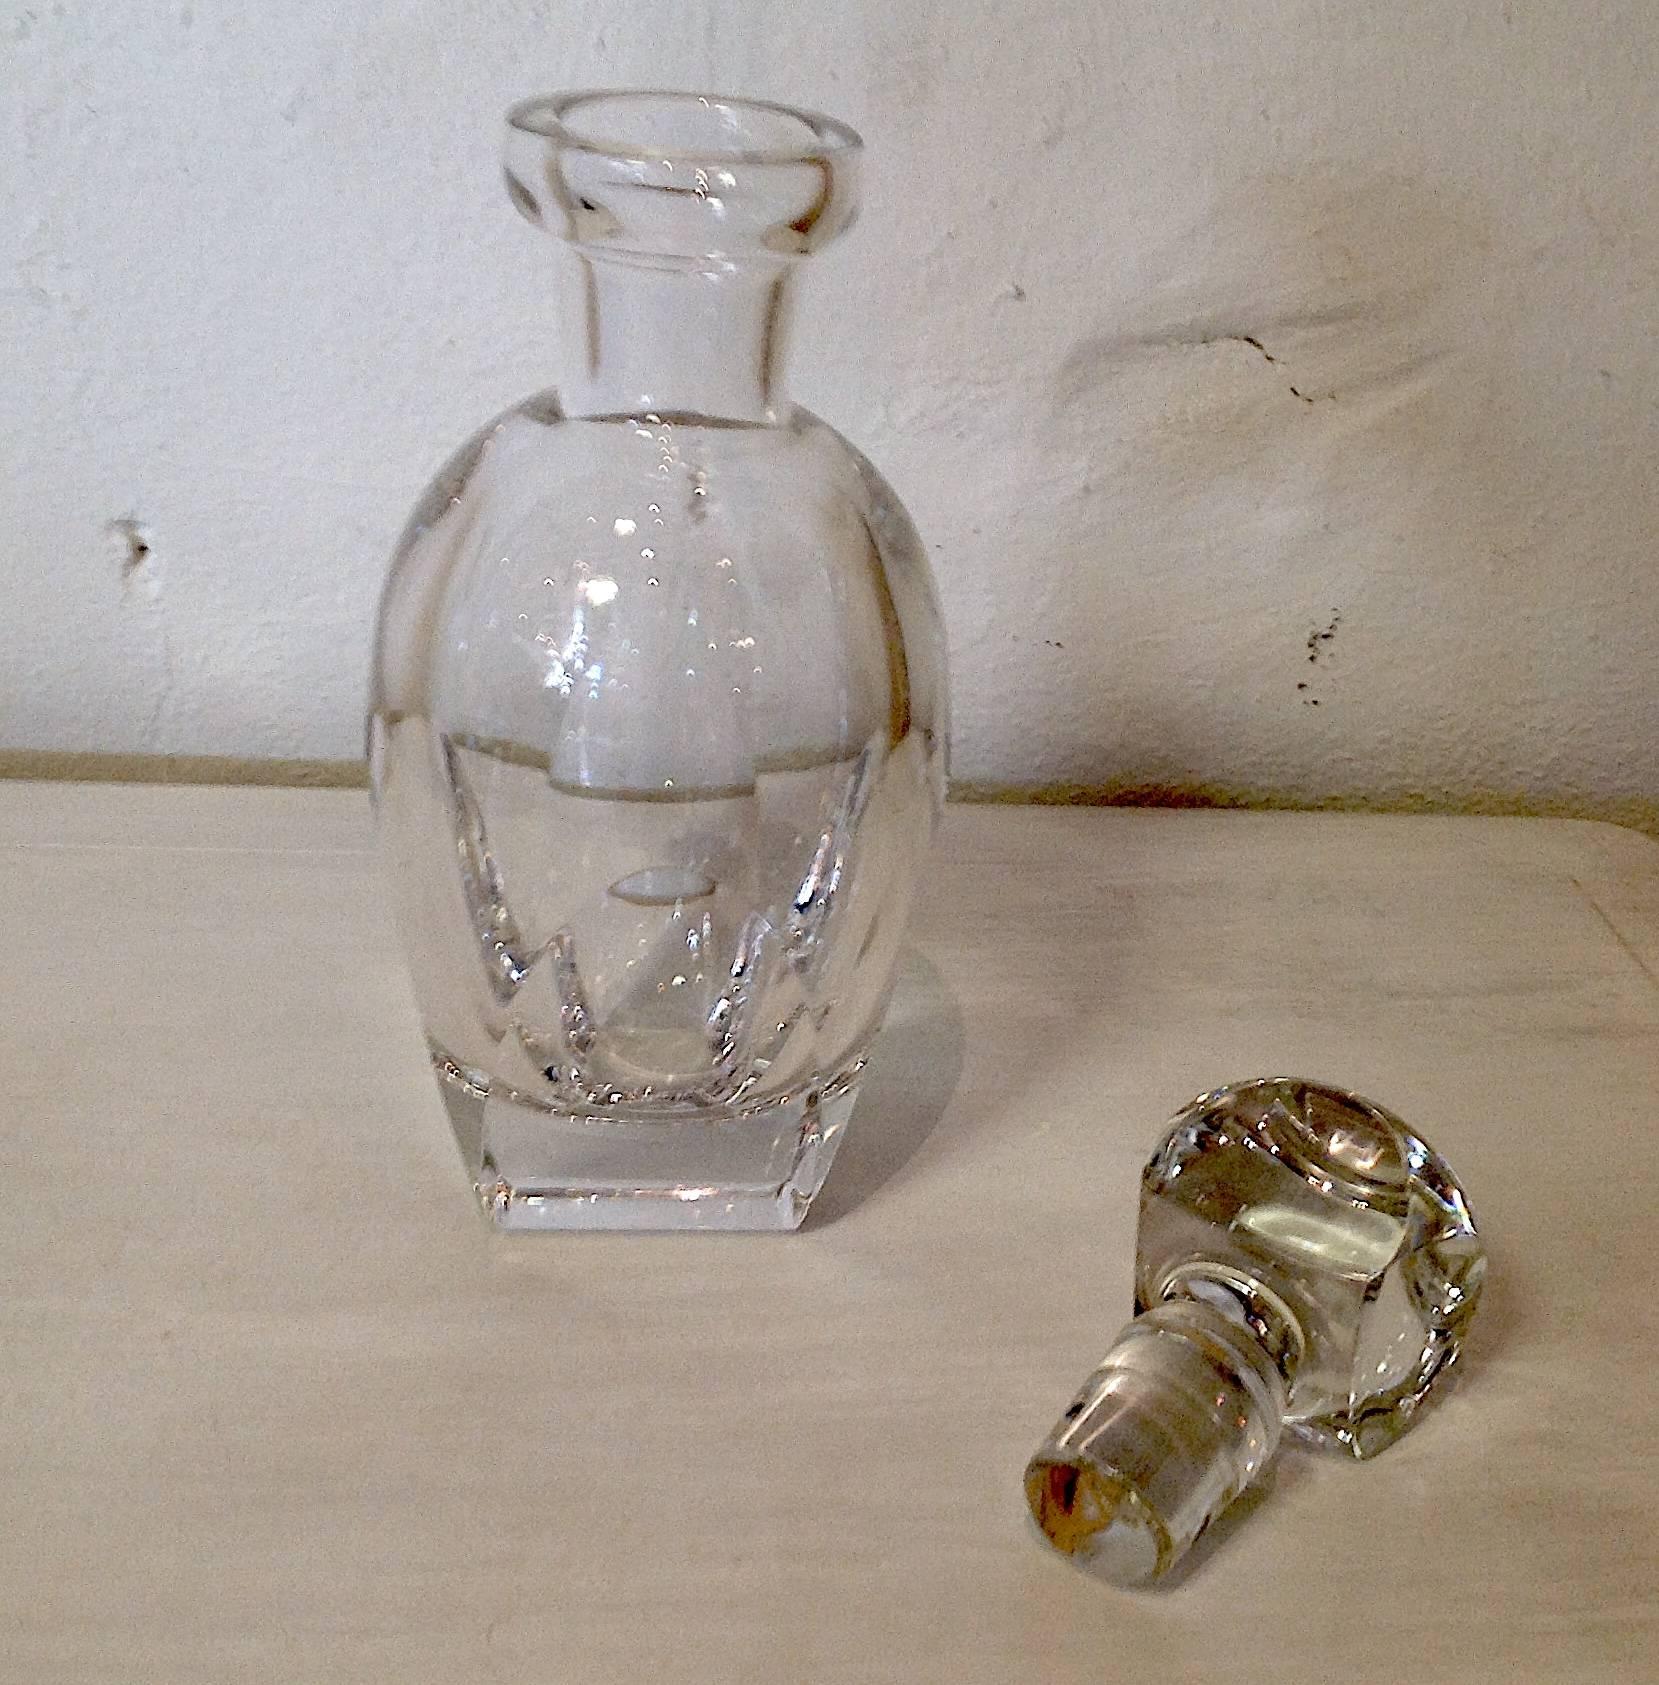 Vintage clear crystal decanter and stopper, etched/engraved with Spode signature on bottom of stopper. Measures: 11.25 inches high and 5 inches wide. Typically used for liquor or wine.